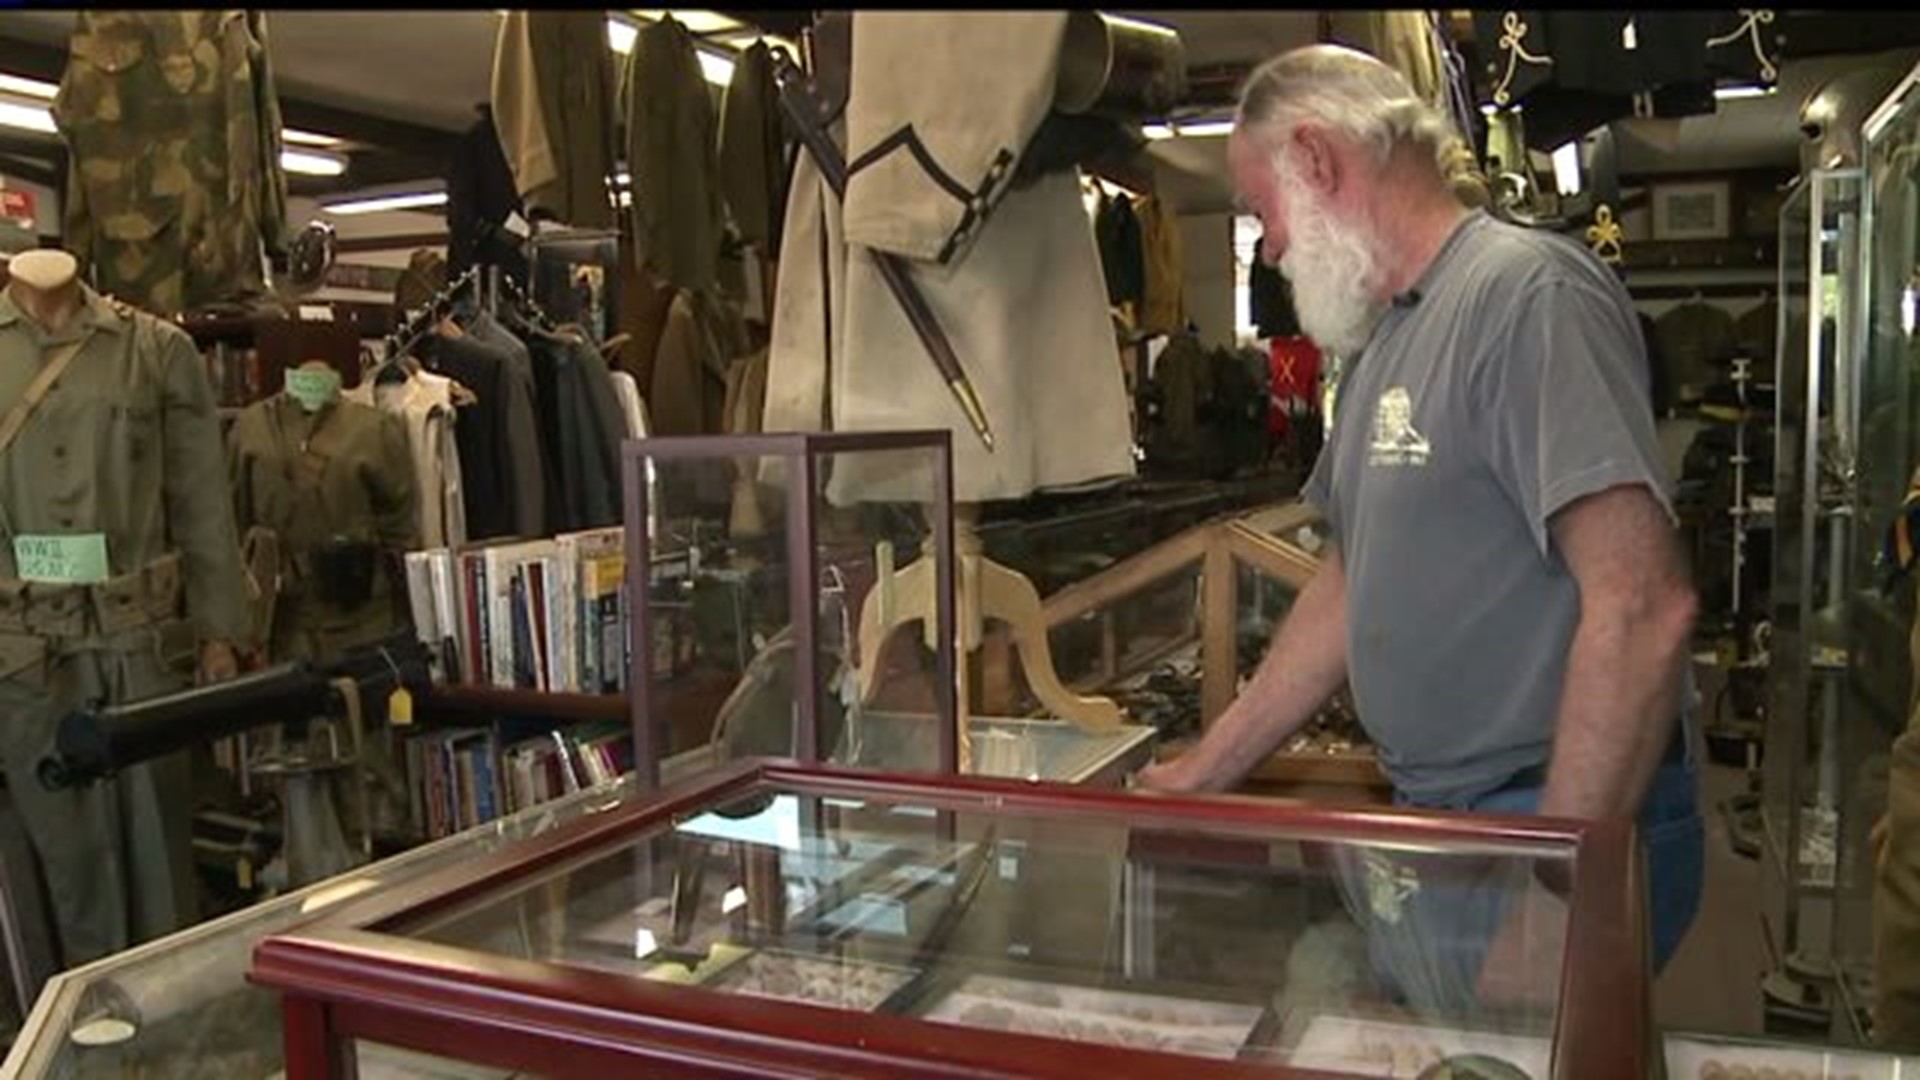 50 years later: Vietnam Veteran uses calling to help cope with pain of war